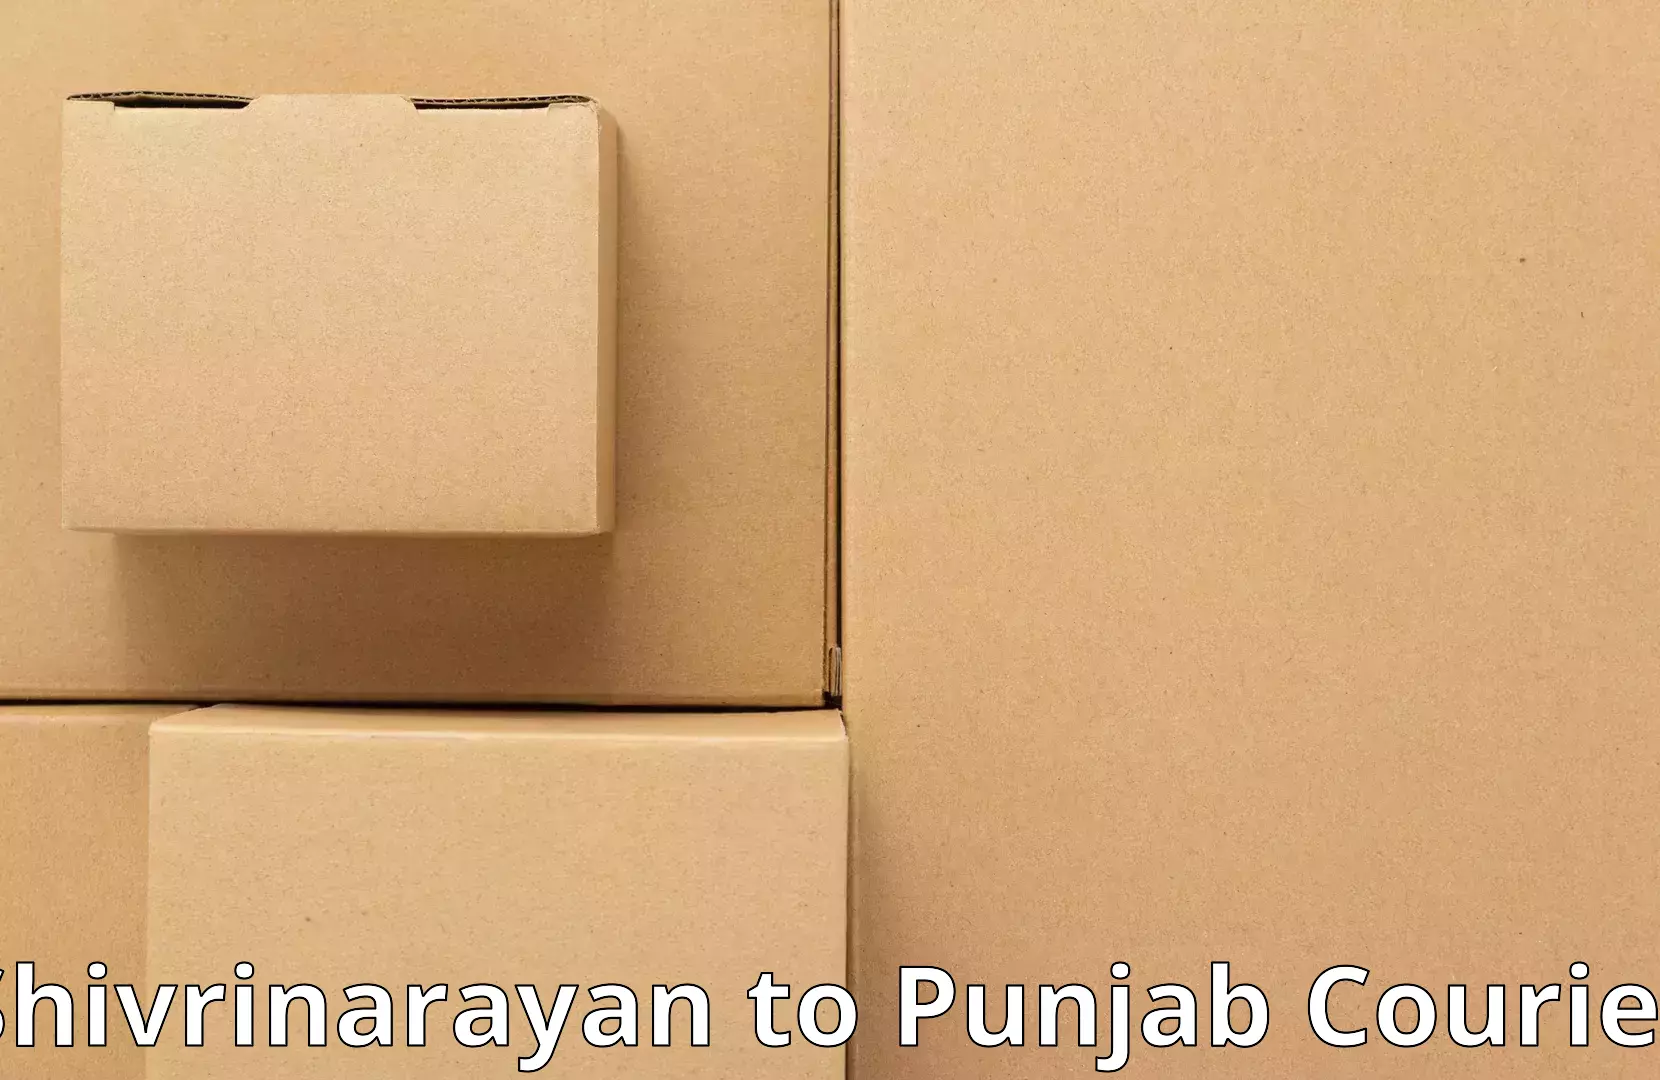 Professional packing services in Shivrinarayan to Punjab